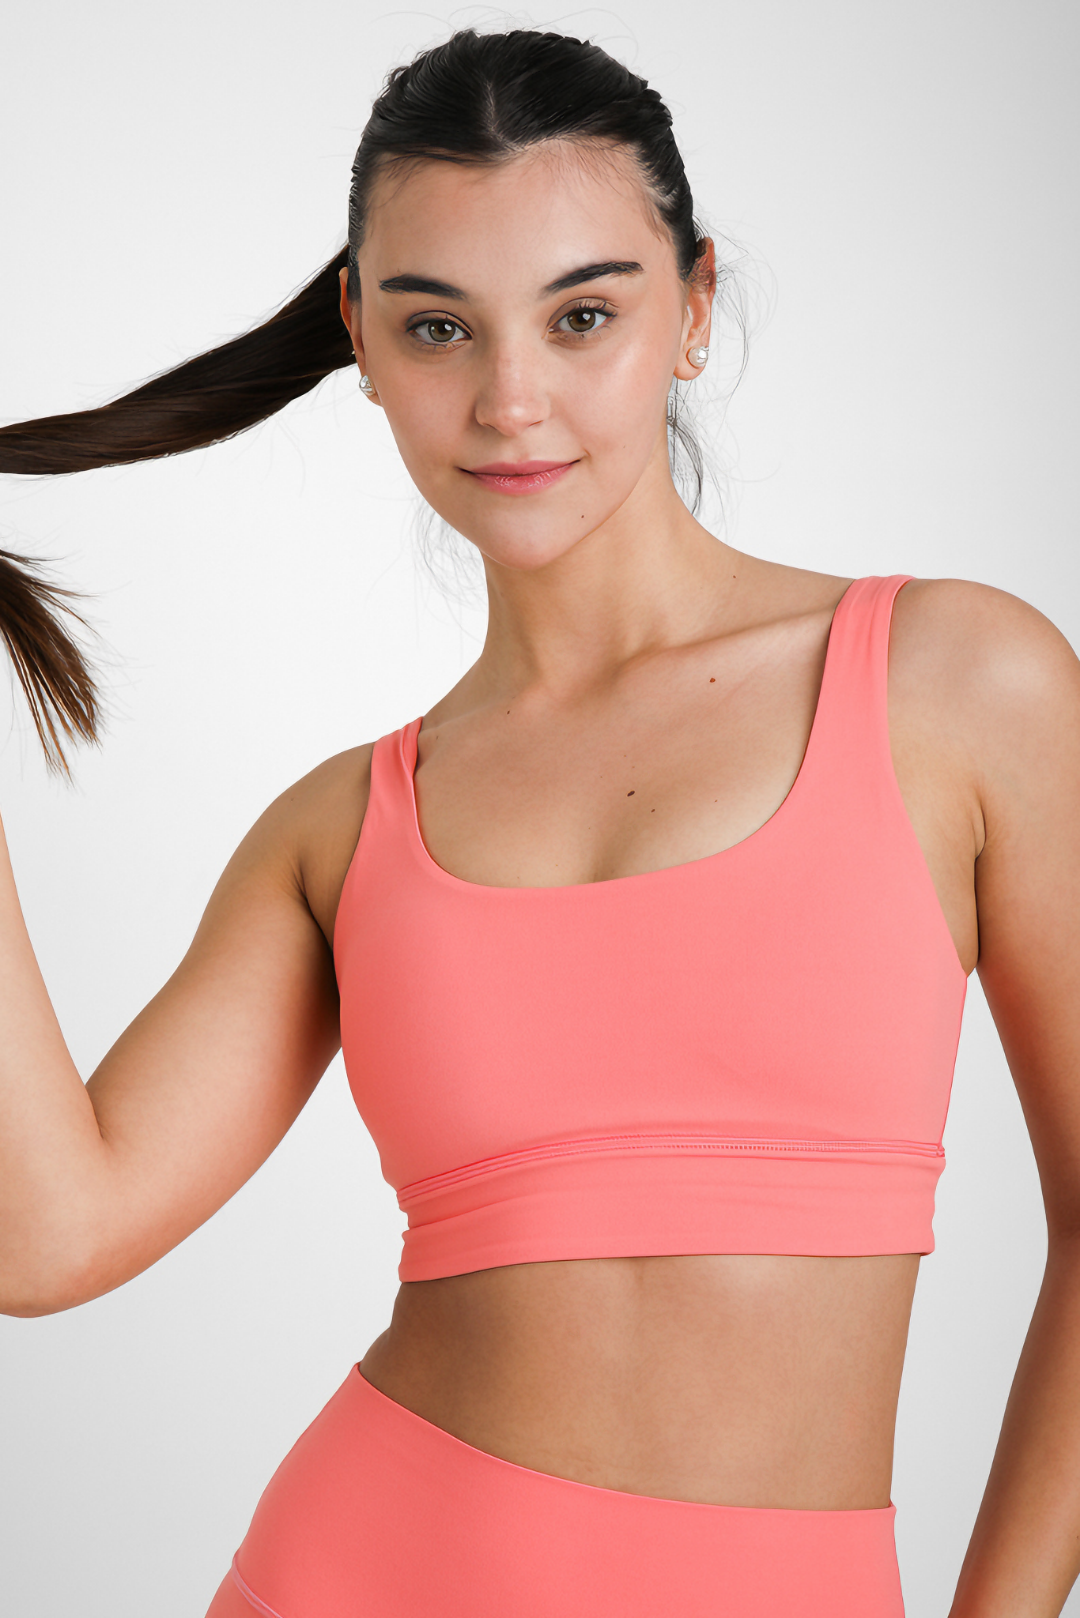 Comfort Aire Bra Posture Corrector Lift Up Bra Women Breathable Yoga  Underwear Shockproof Sports Support Fitness Vest Bras From Automove, $52.99